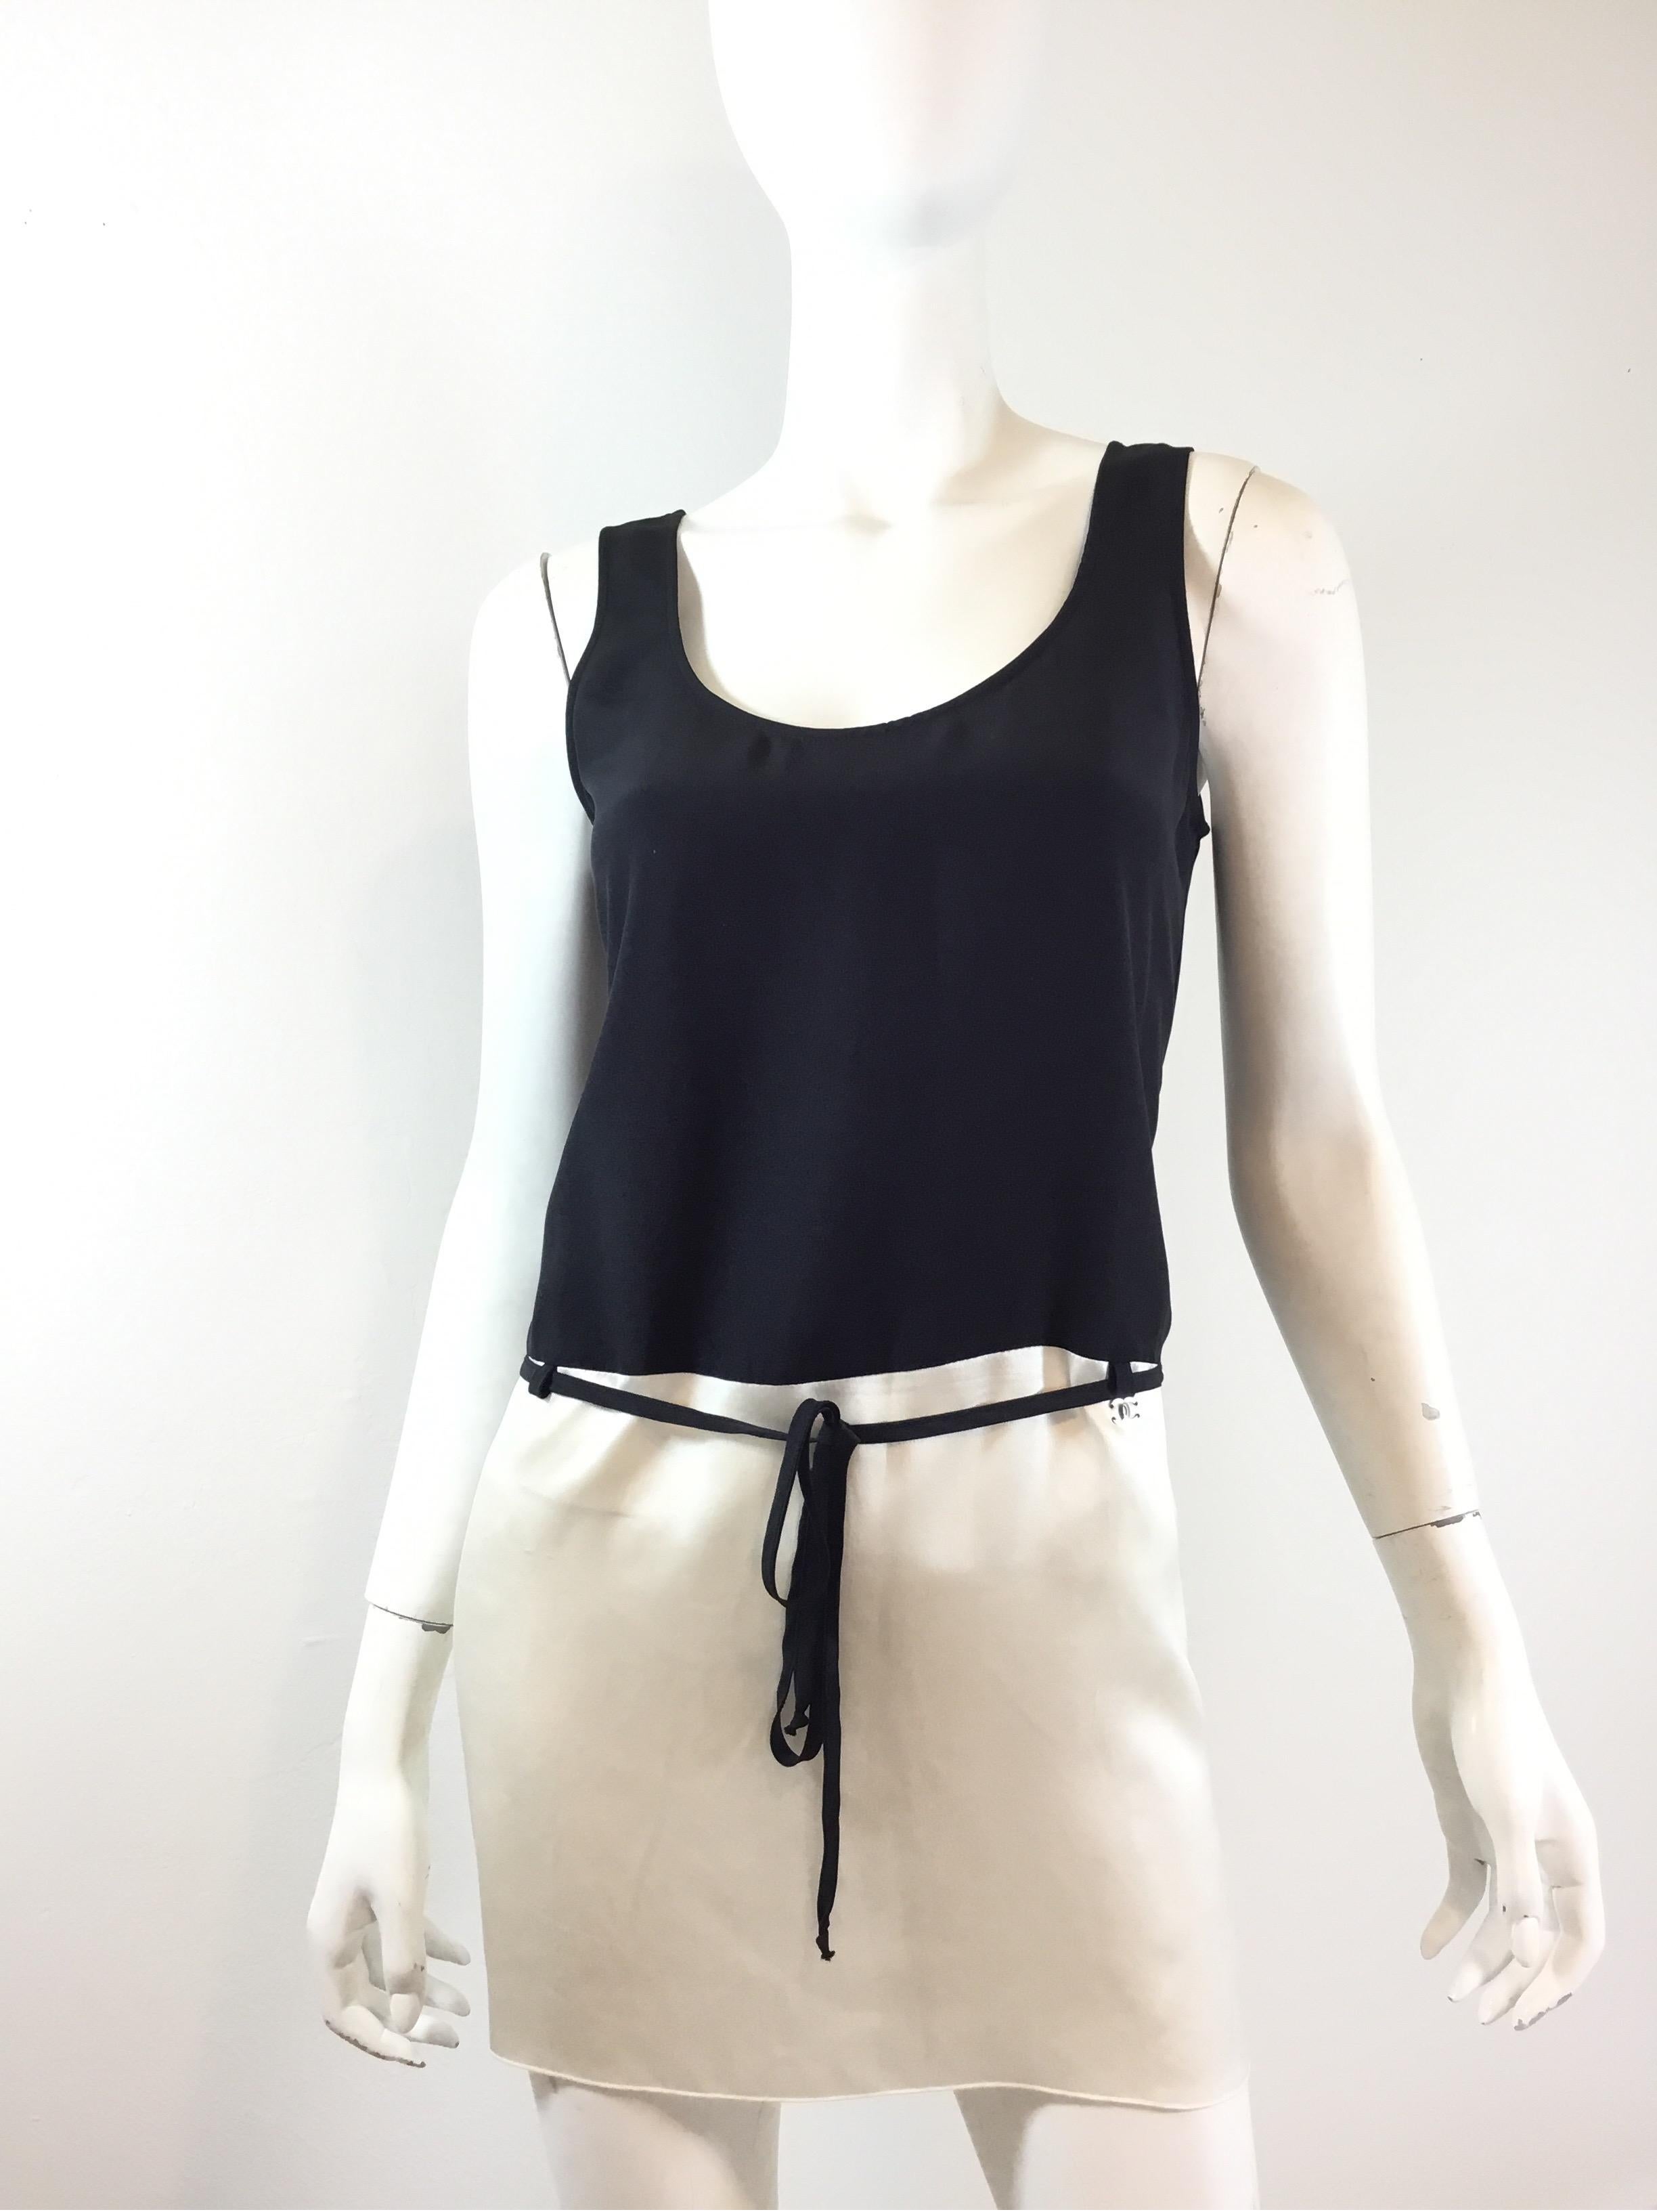 Chanel silk tank top in a black and ivory color block with a ribbon tie at the waist. 100% silk, size 36, made in Italy. Excellent condition.

Bust 36”, waist 38”, length 26”